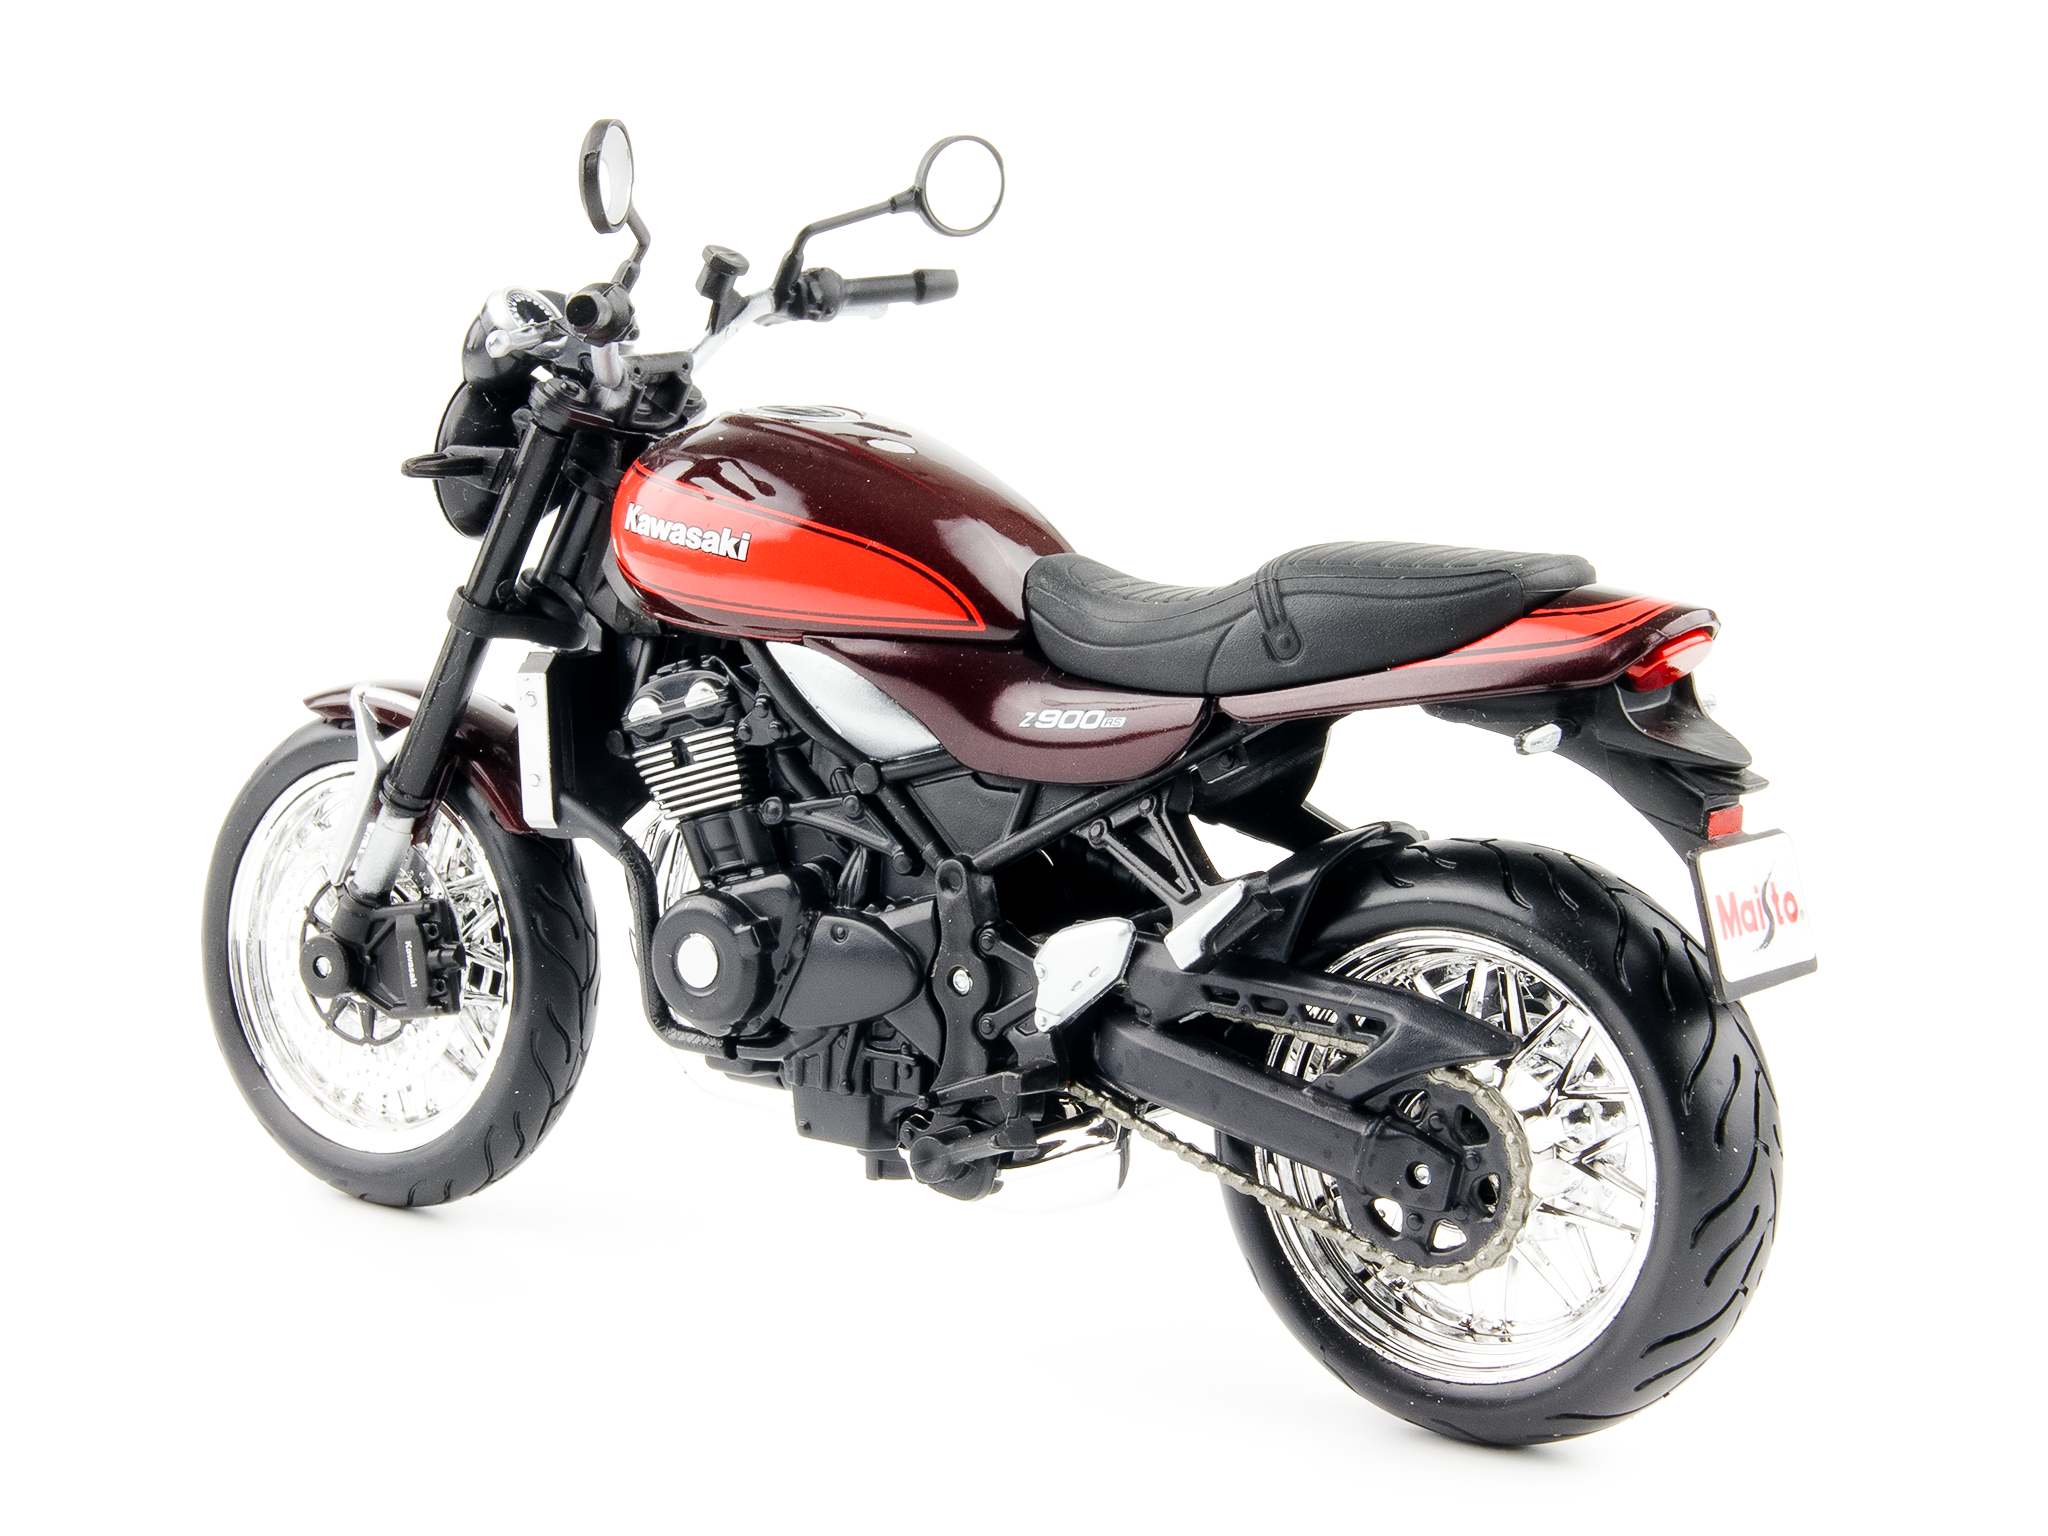 Kawasaki Z900RS 2019 Candytone Brown/Candytone Orange - 1:12 Scale Diecast Model Motorcycle